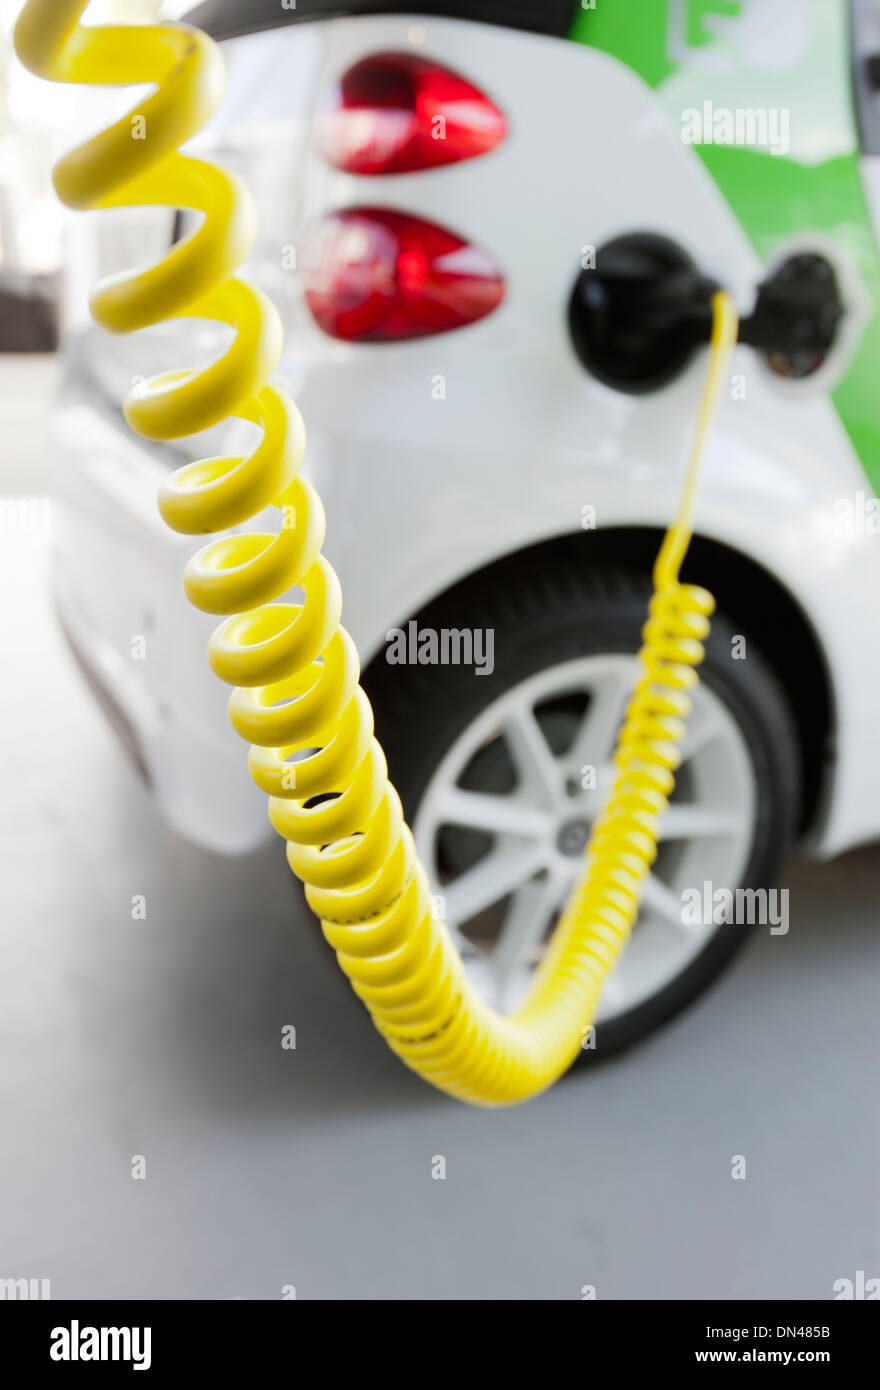 Electric vehile being charged on electric vehicle charging station. Bright yellow power line and plug in the foreground Stock Photo